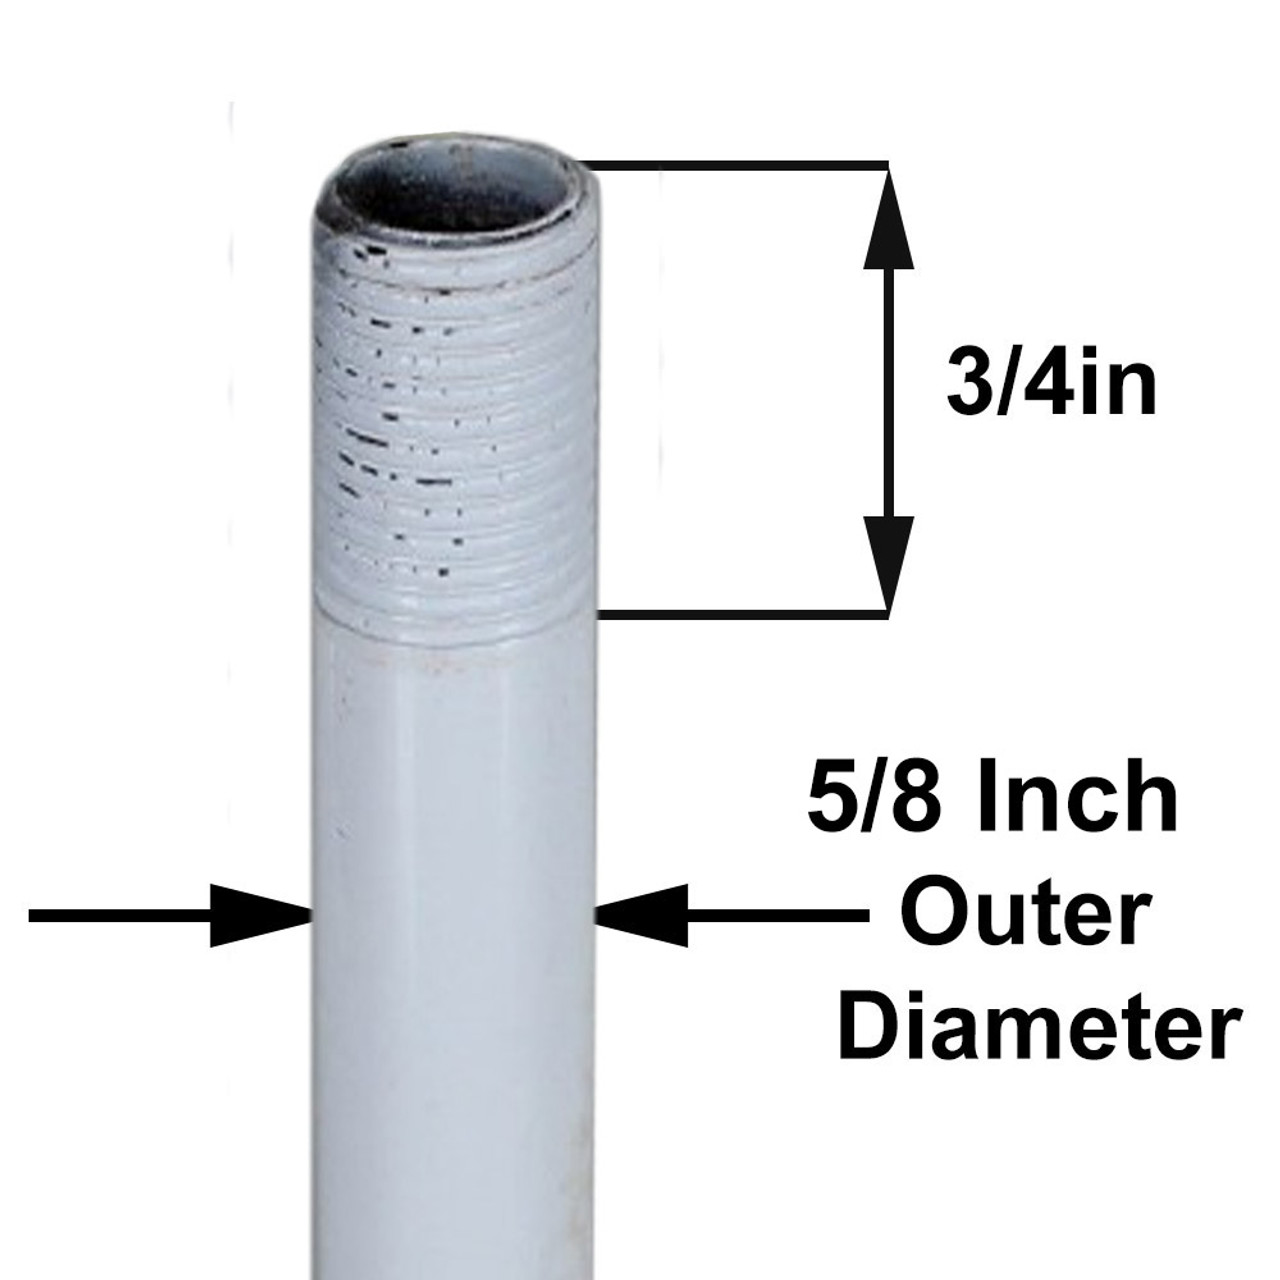 48in. White Enamel Finish Pipe with 3/8ips. Thread